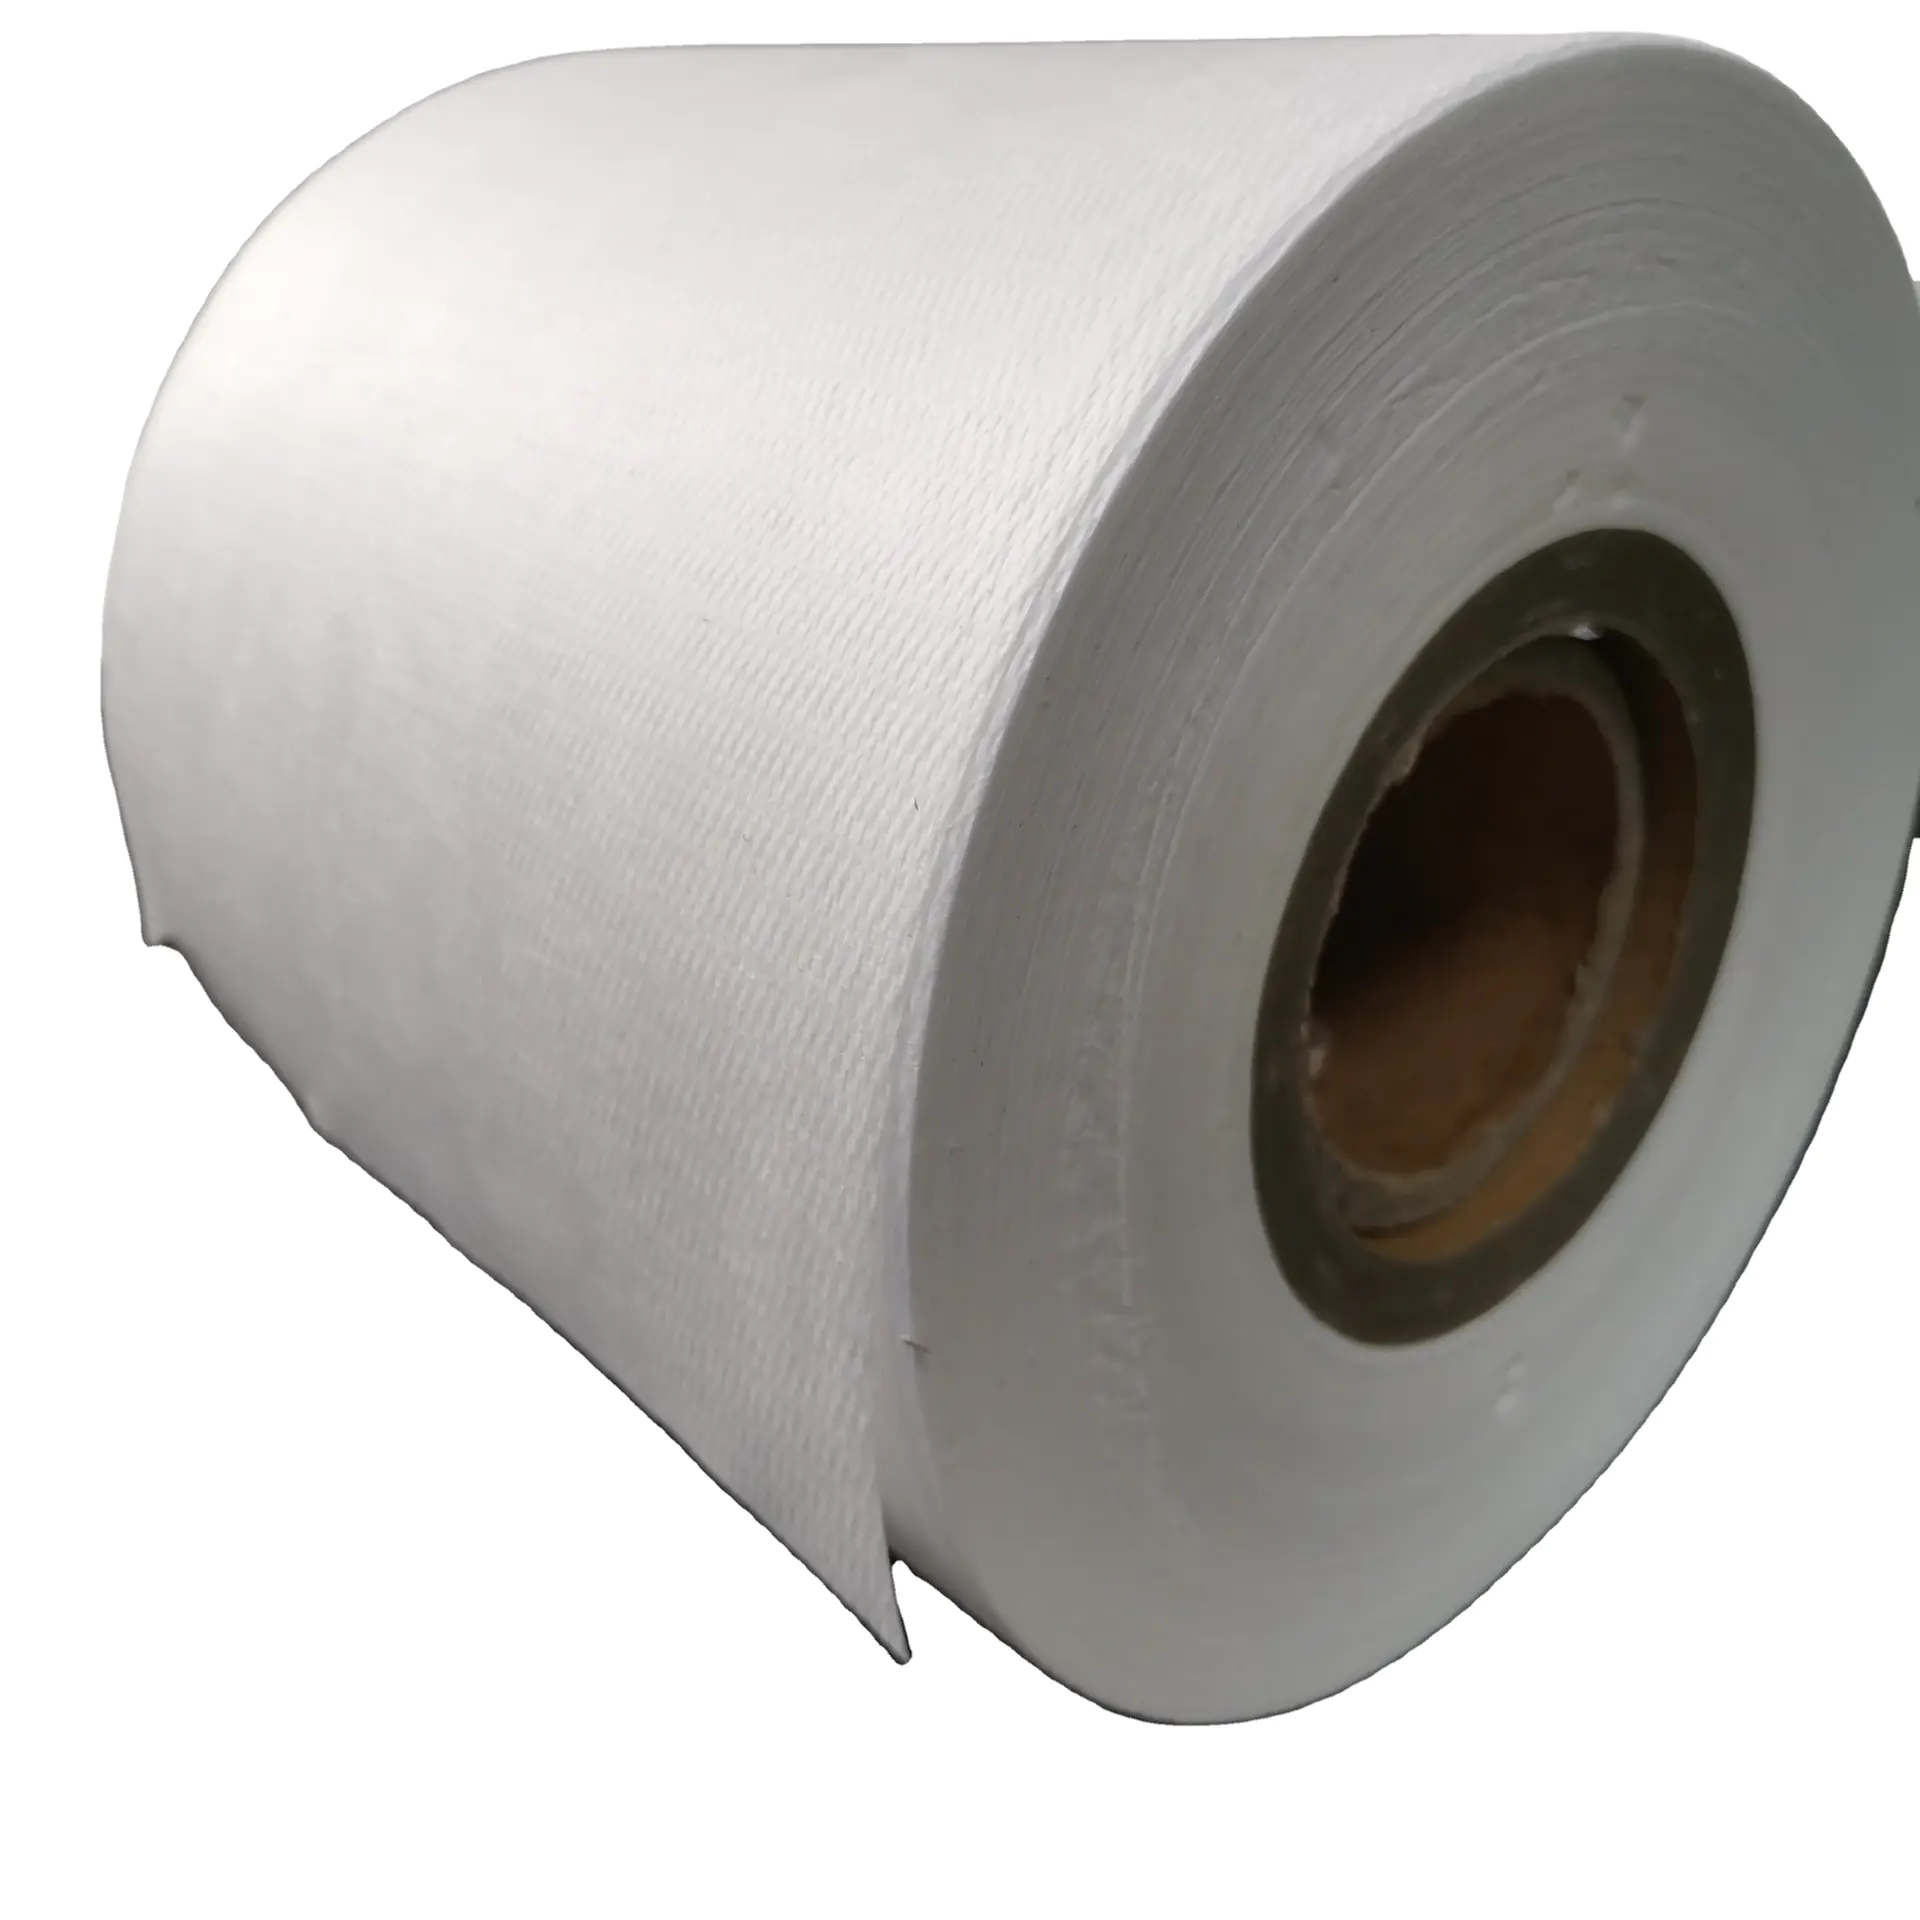 high quality 25gsm meltblown polypropylene nonwoven fabric filter white